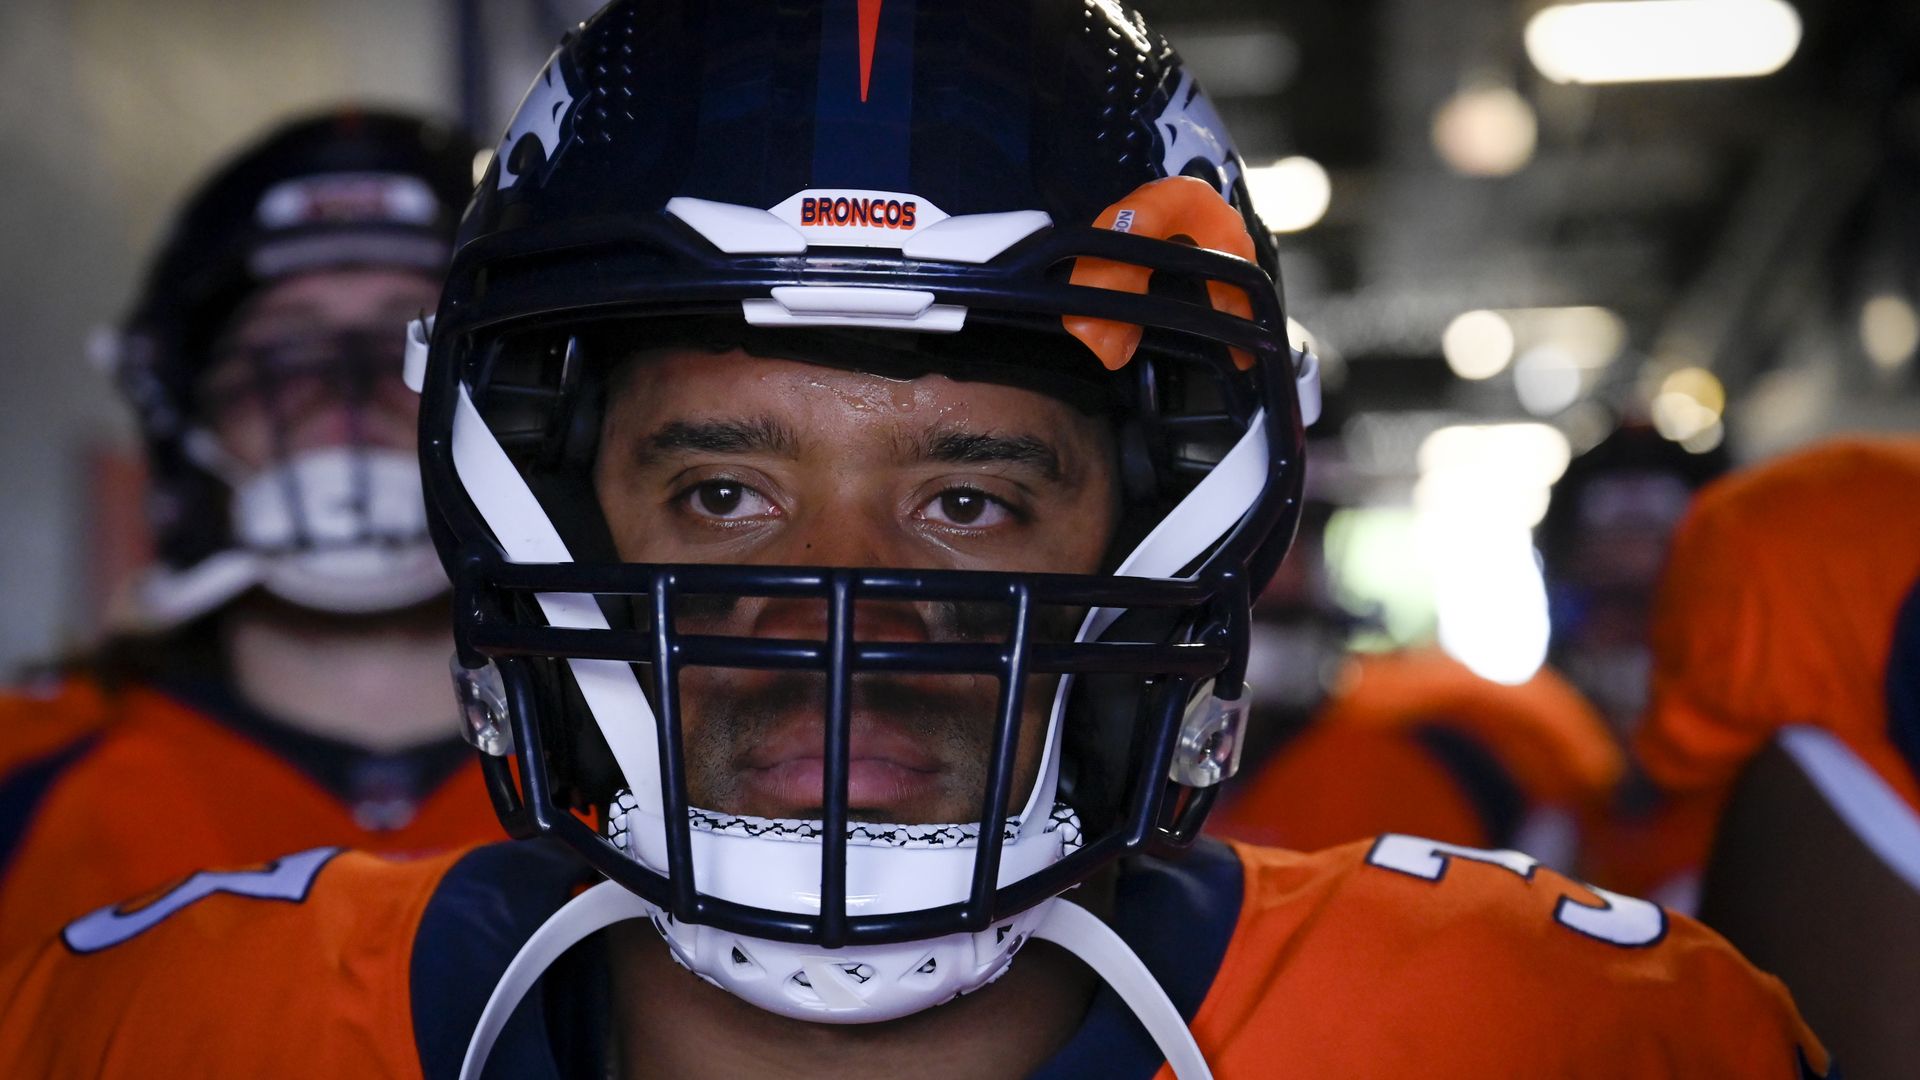  Russell Wilson leads his team to the field before a preseason game. Photo: AAron Ontiveroz/Denver Post via Getty Images